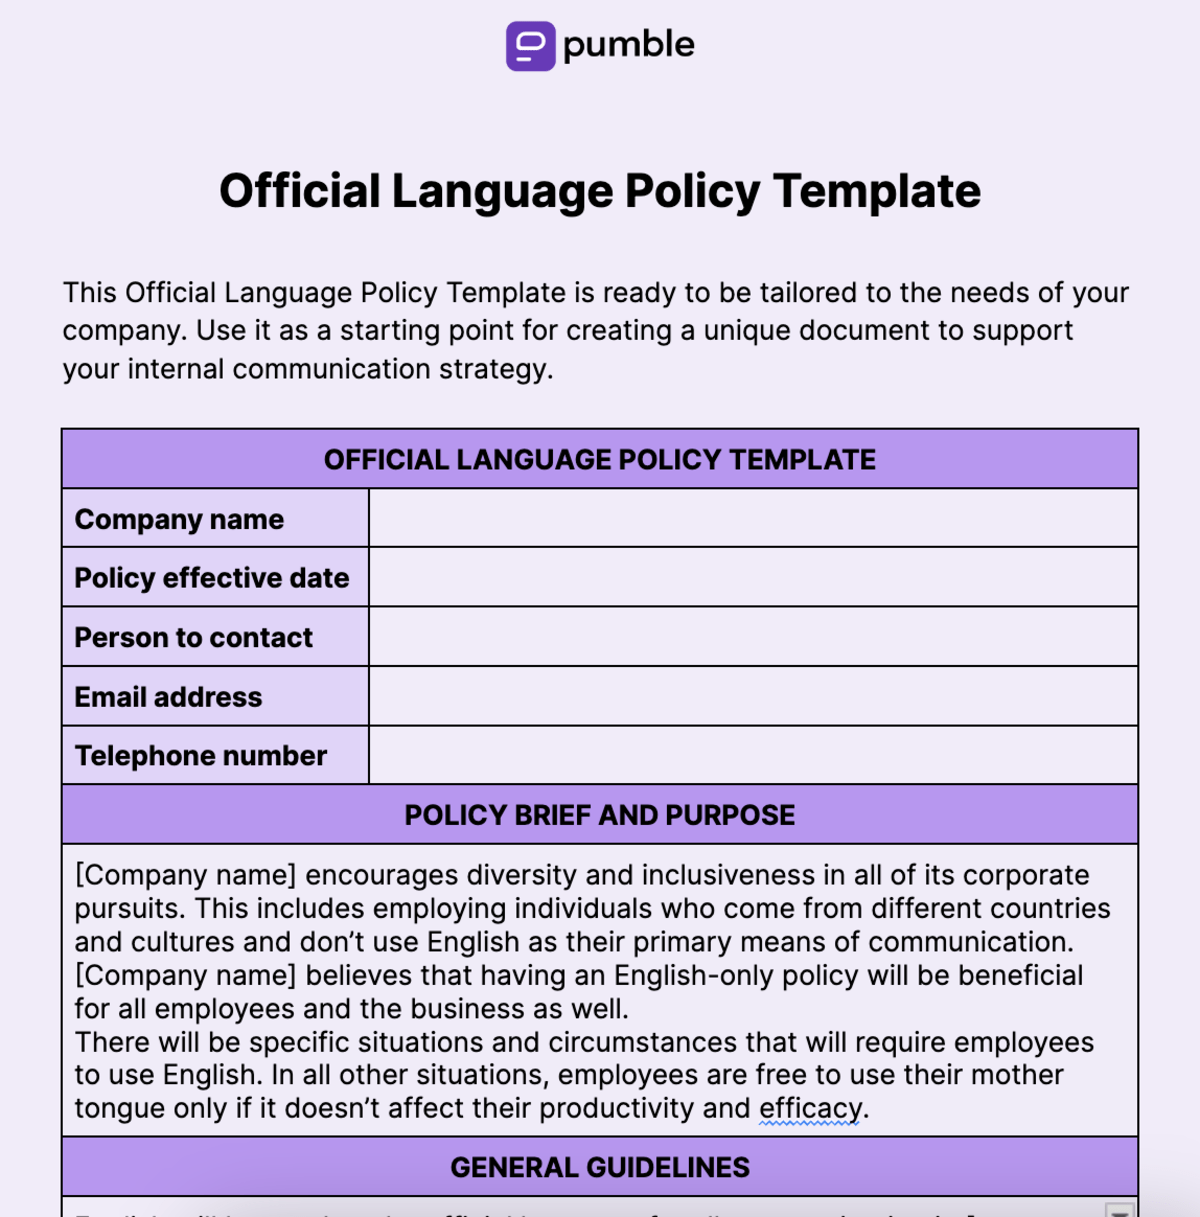 Official Language Policy Template